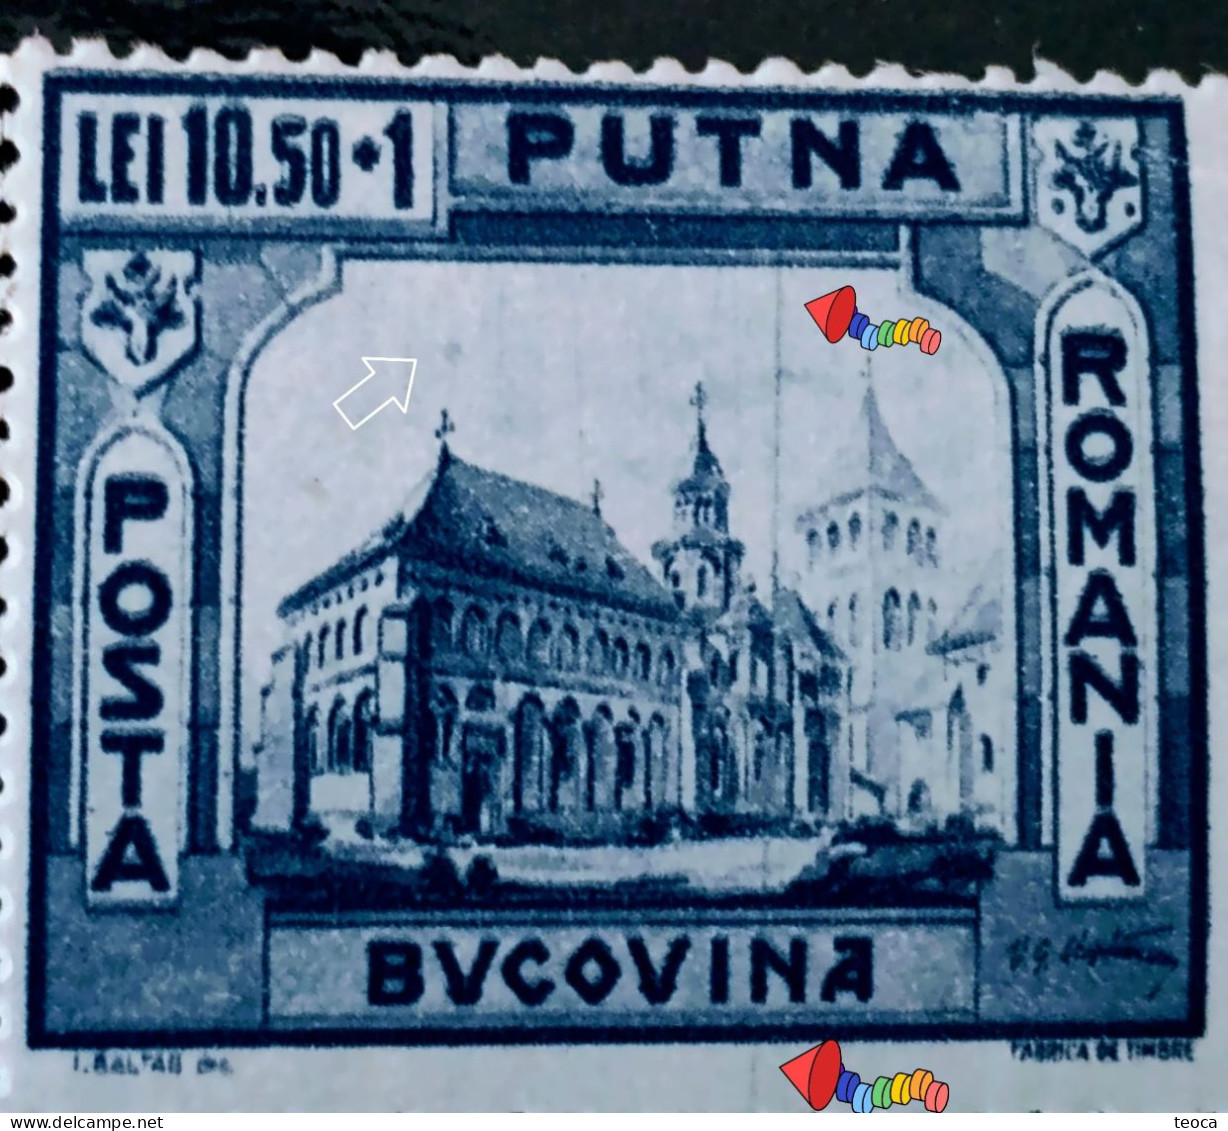 Stamps Errors Romania 1941,Mi 740 Printed With Full Color Circle And Vertical Line On, Bucovina, Putna Monastery,Unused - Plaatfouten En Curiosa